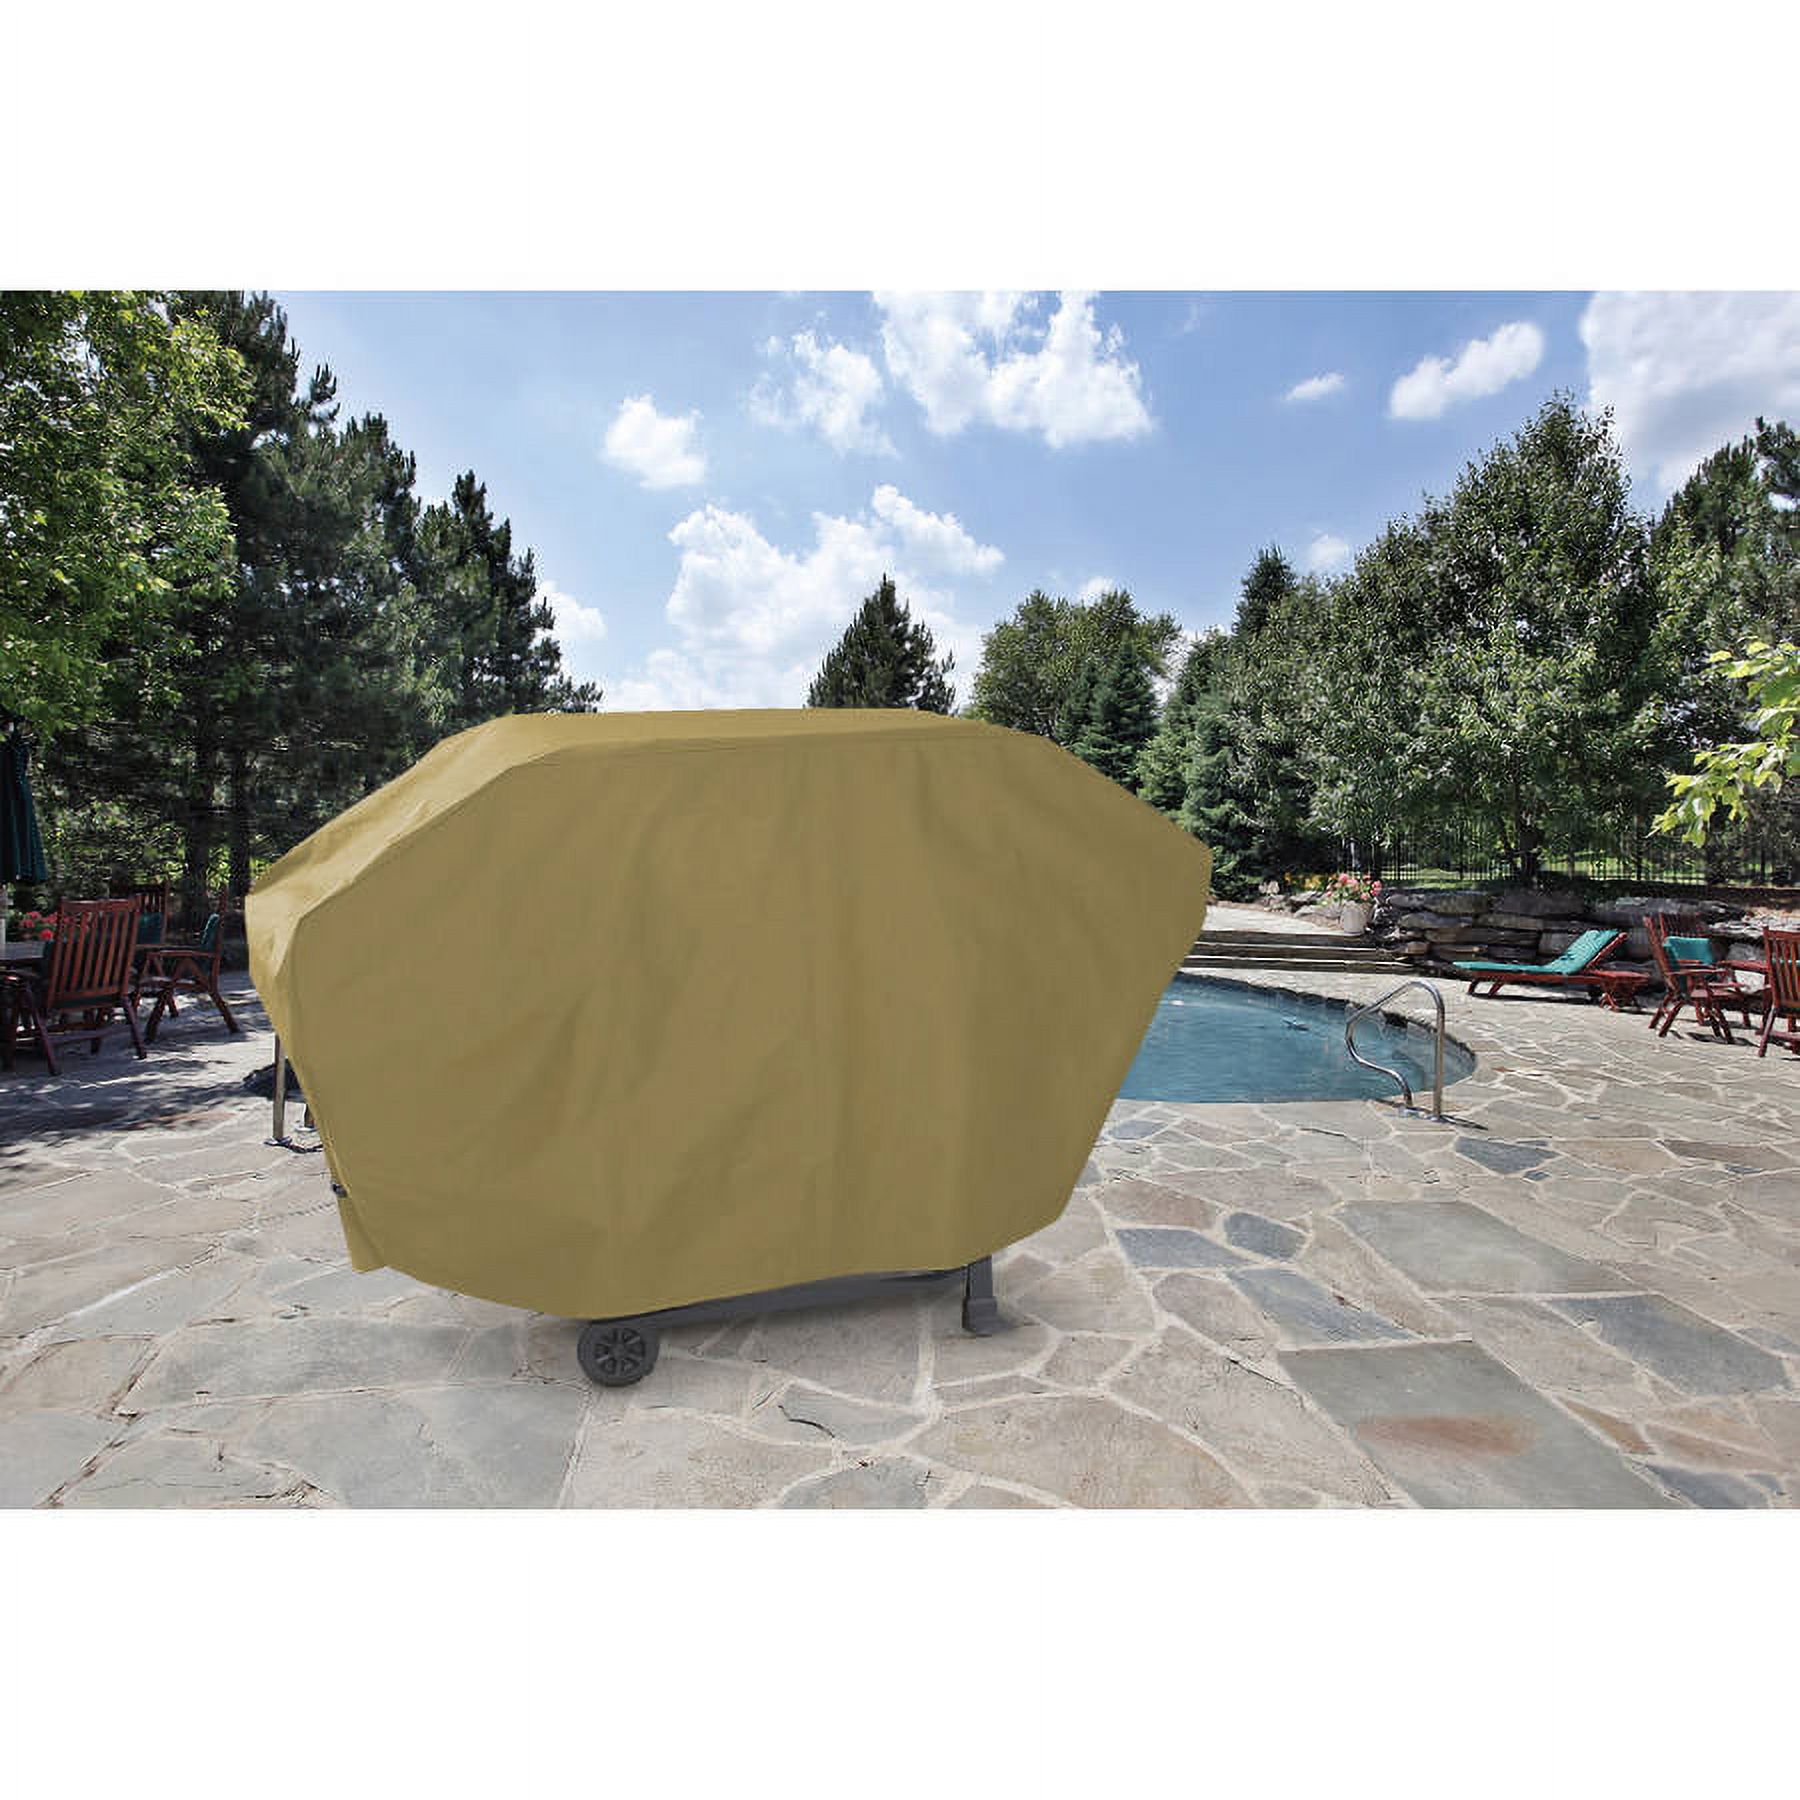 65" Deluxe Grill Cover by Allen Company - image 1 of 3